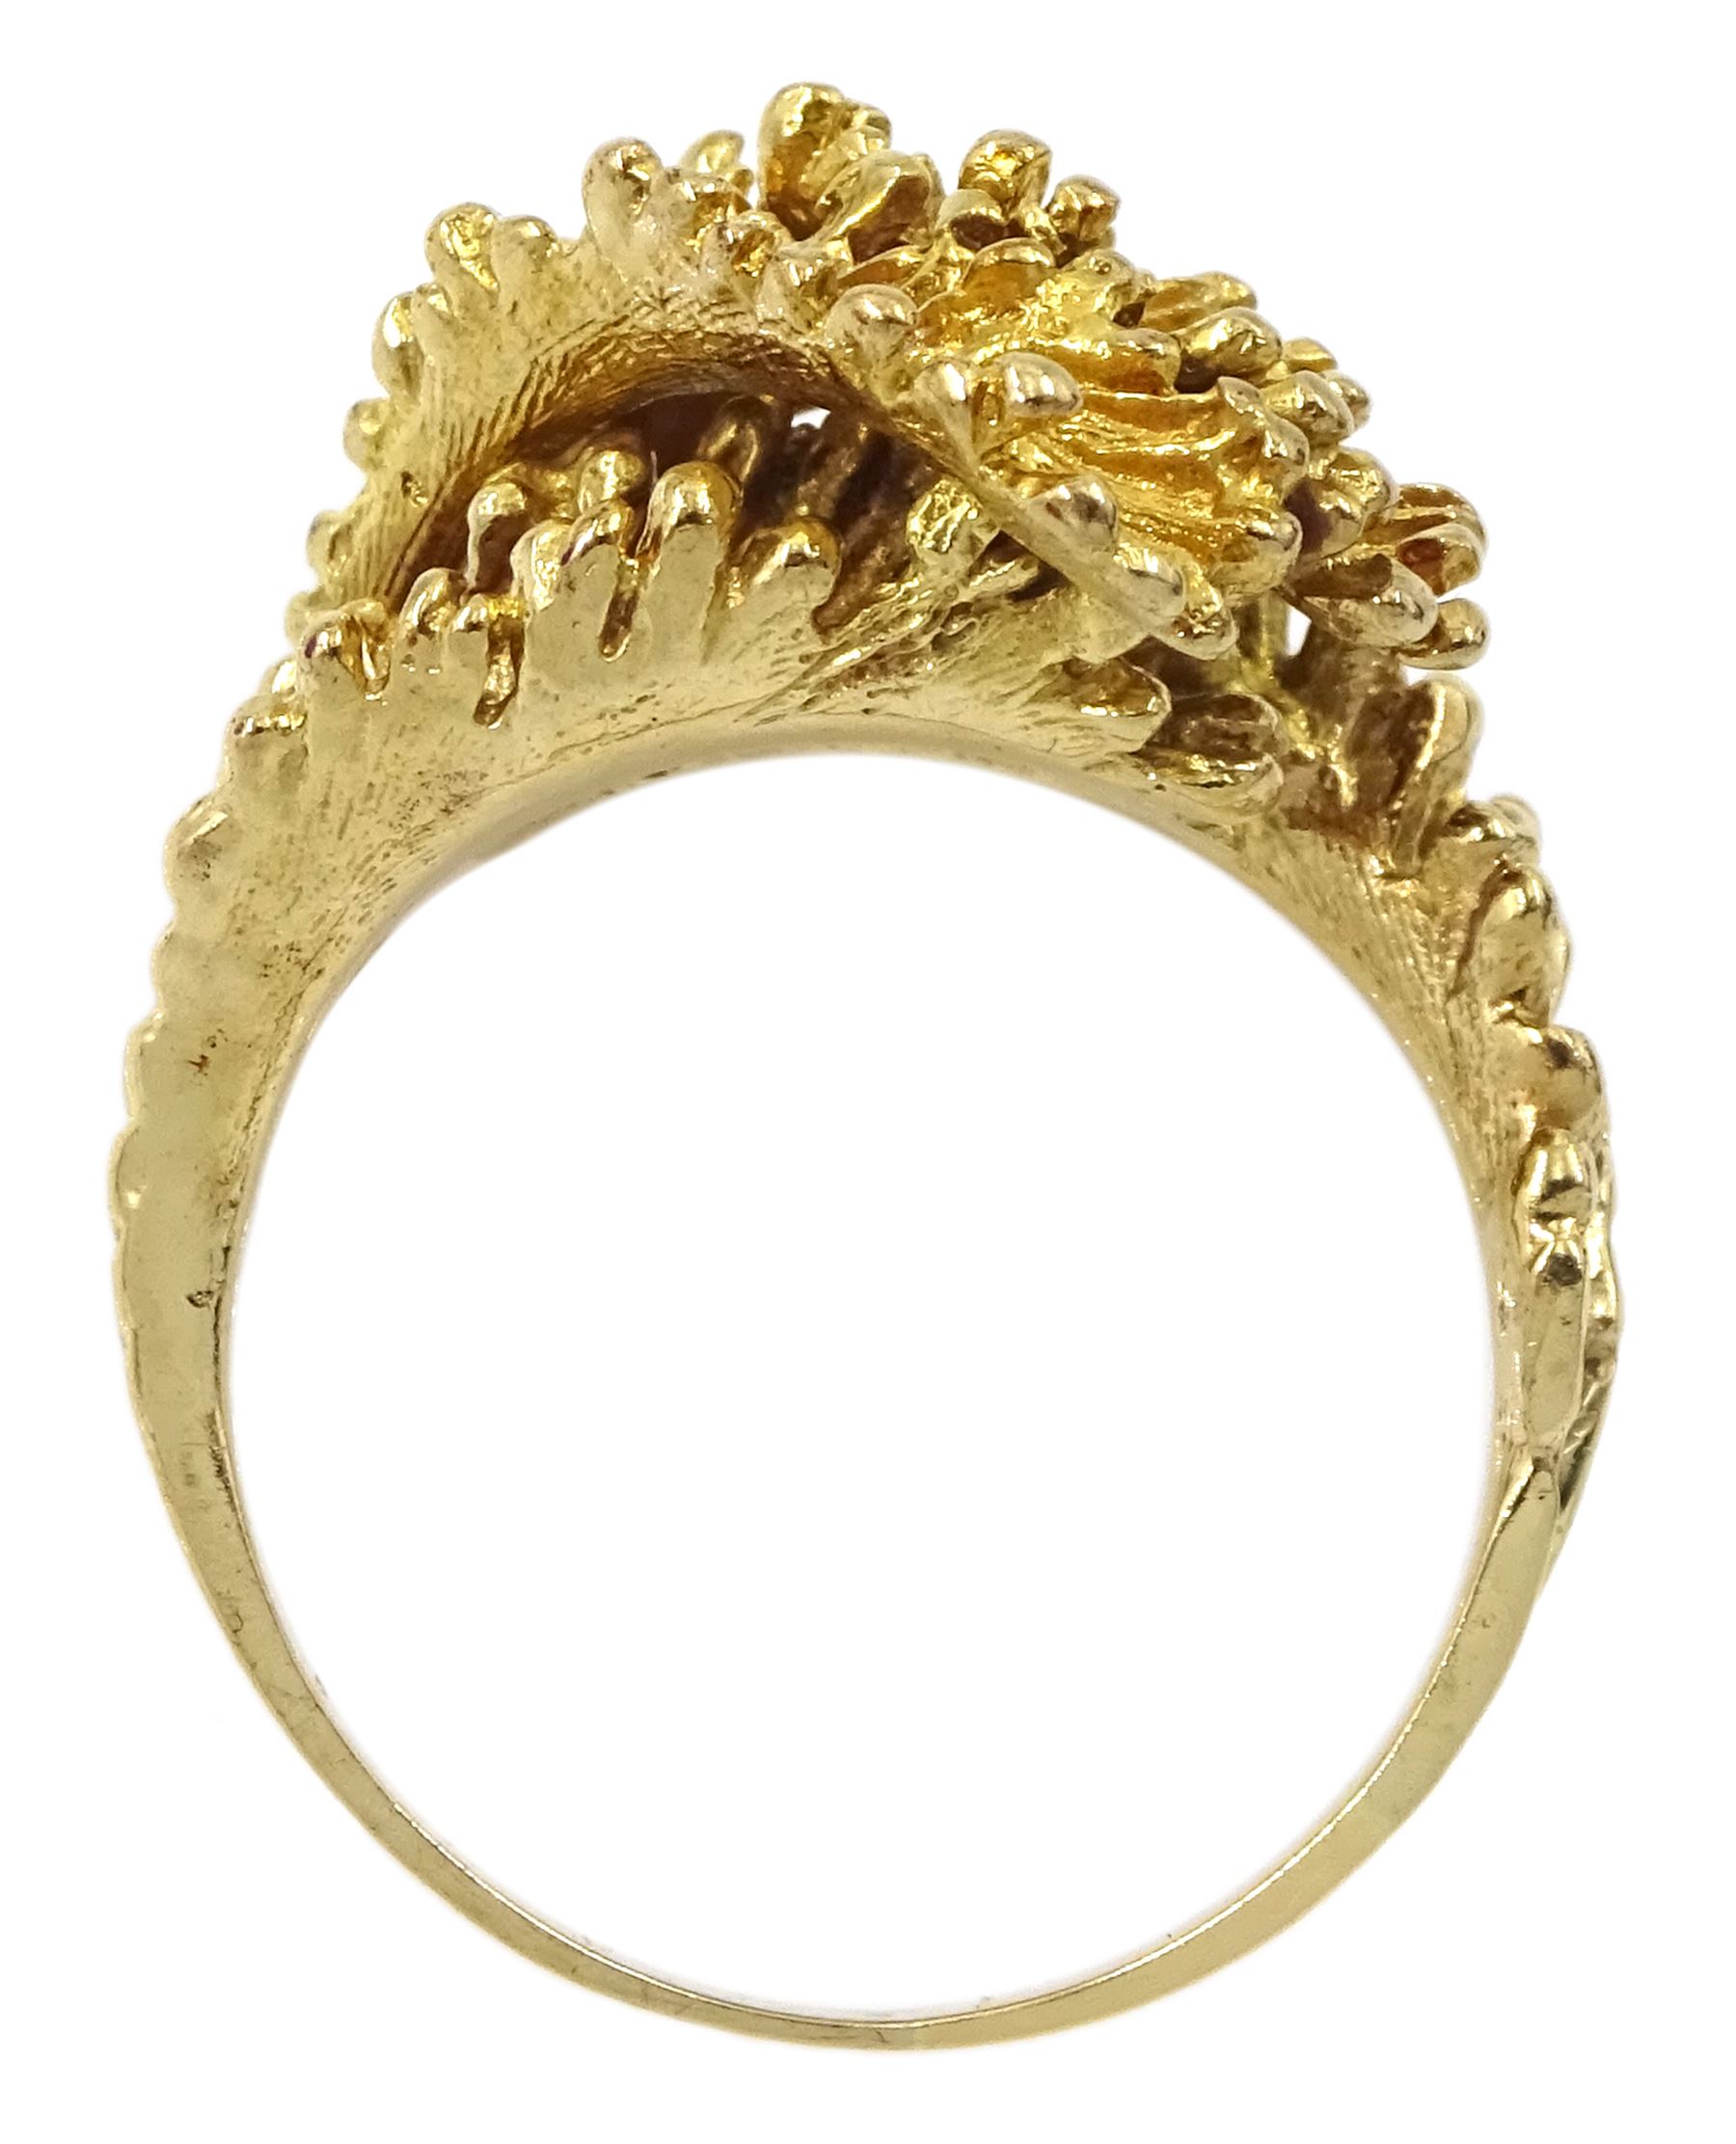 9ct gold abstract leaf design ring - Image 5 of 5